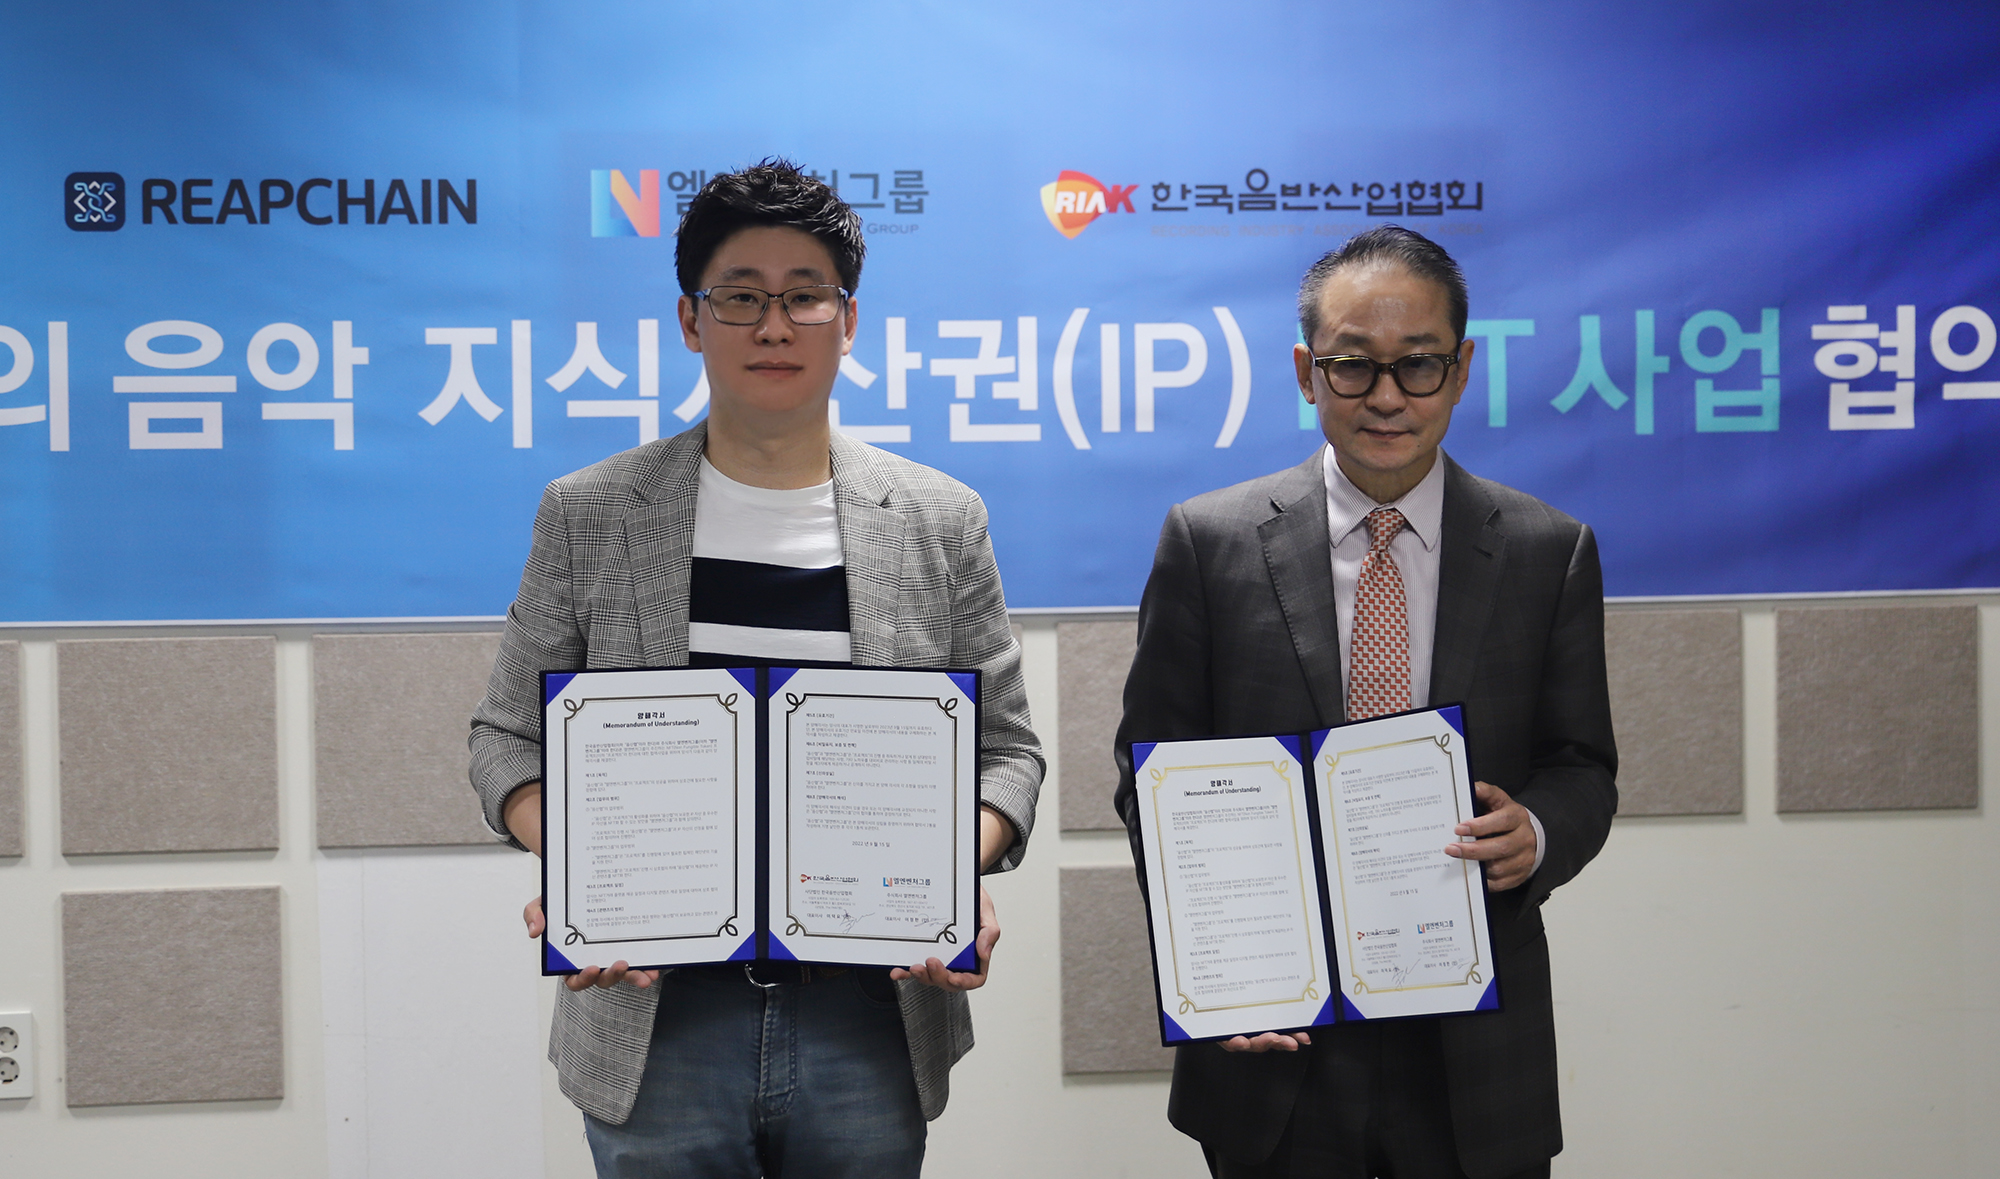 REAPCHAIN signed a business agreement with the Korea Music Industry Association for NFT business cooperation.